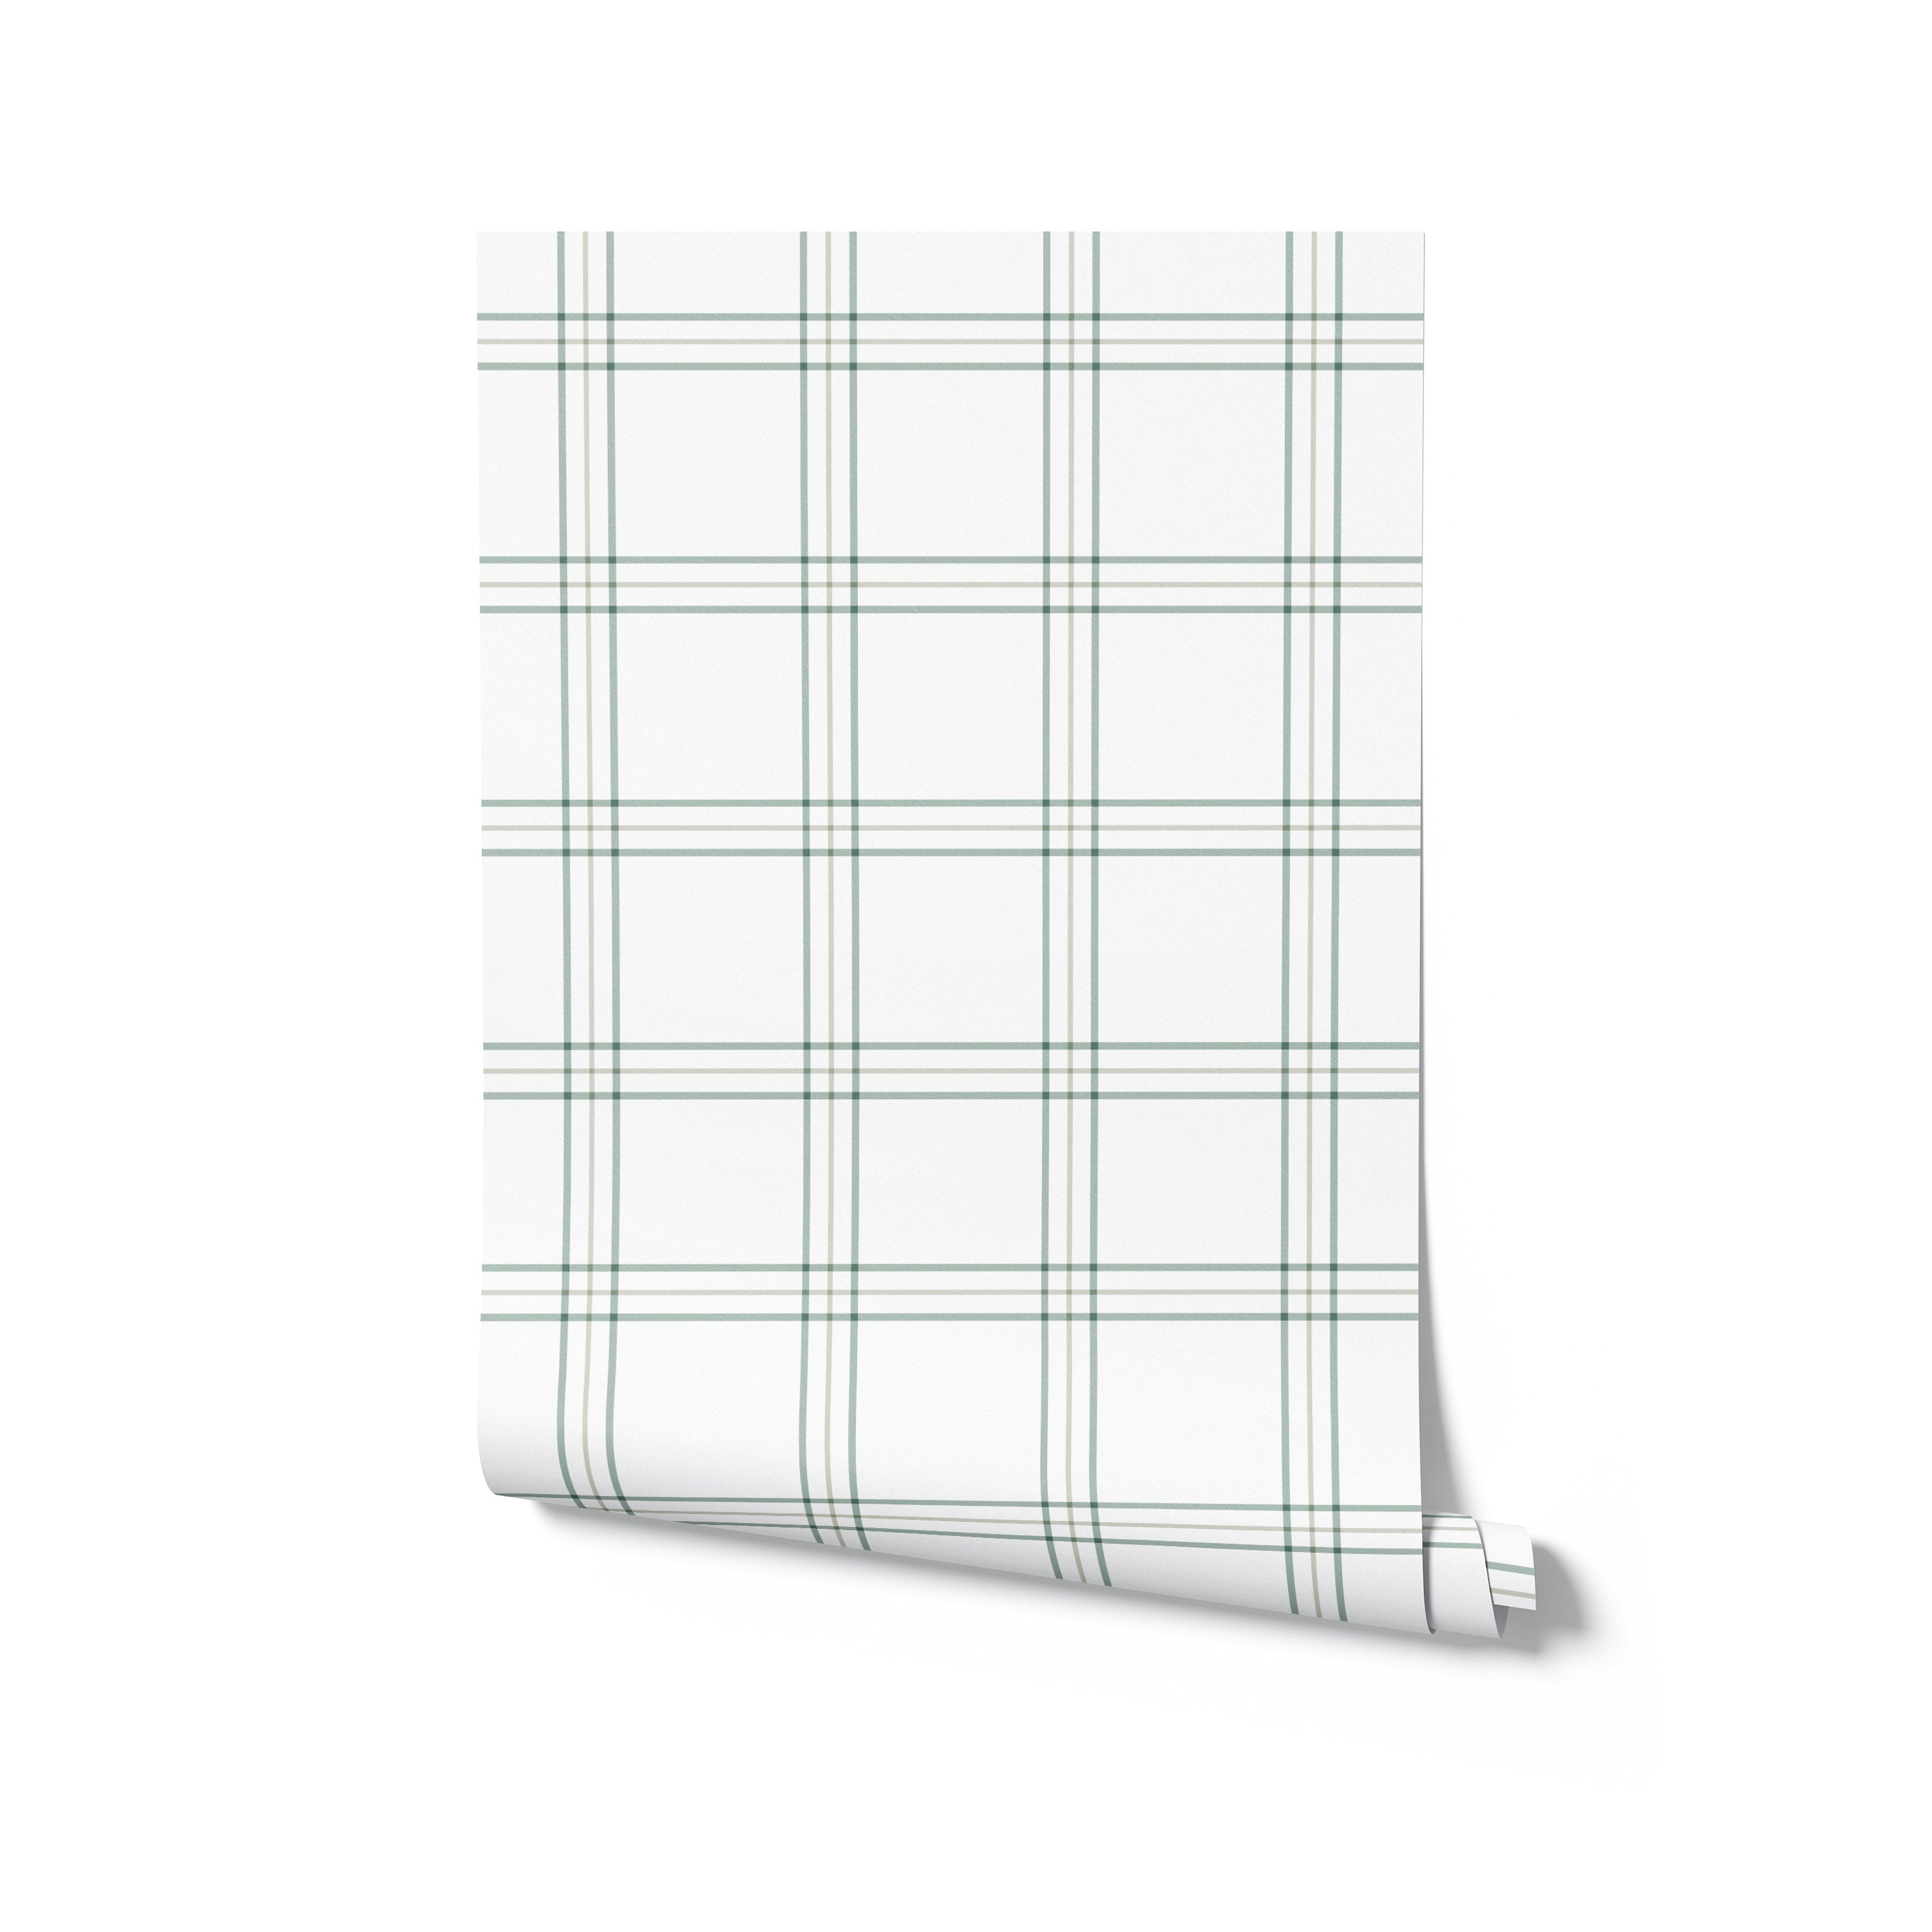 A rolled sample of Traditional Tartan Plaid Wallpaper highlighting the fabric-like texture and timeless pattern of original colour stripes, suggesting a design that could bring a sense of heritage and comfort to interiors ranging from the modern to the classic.